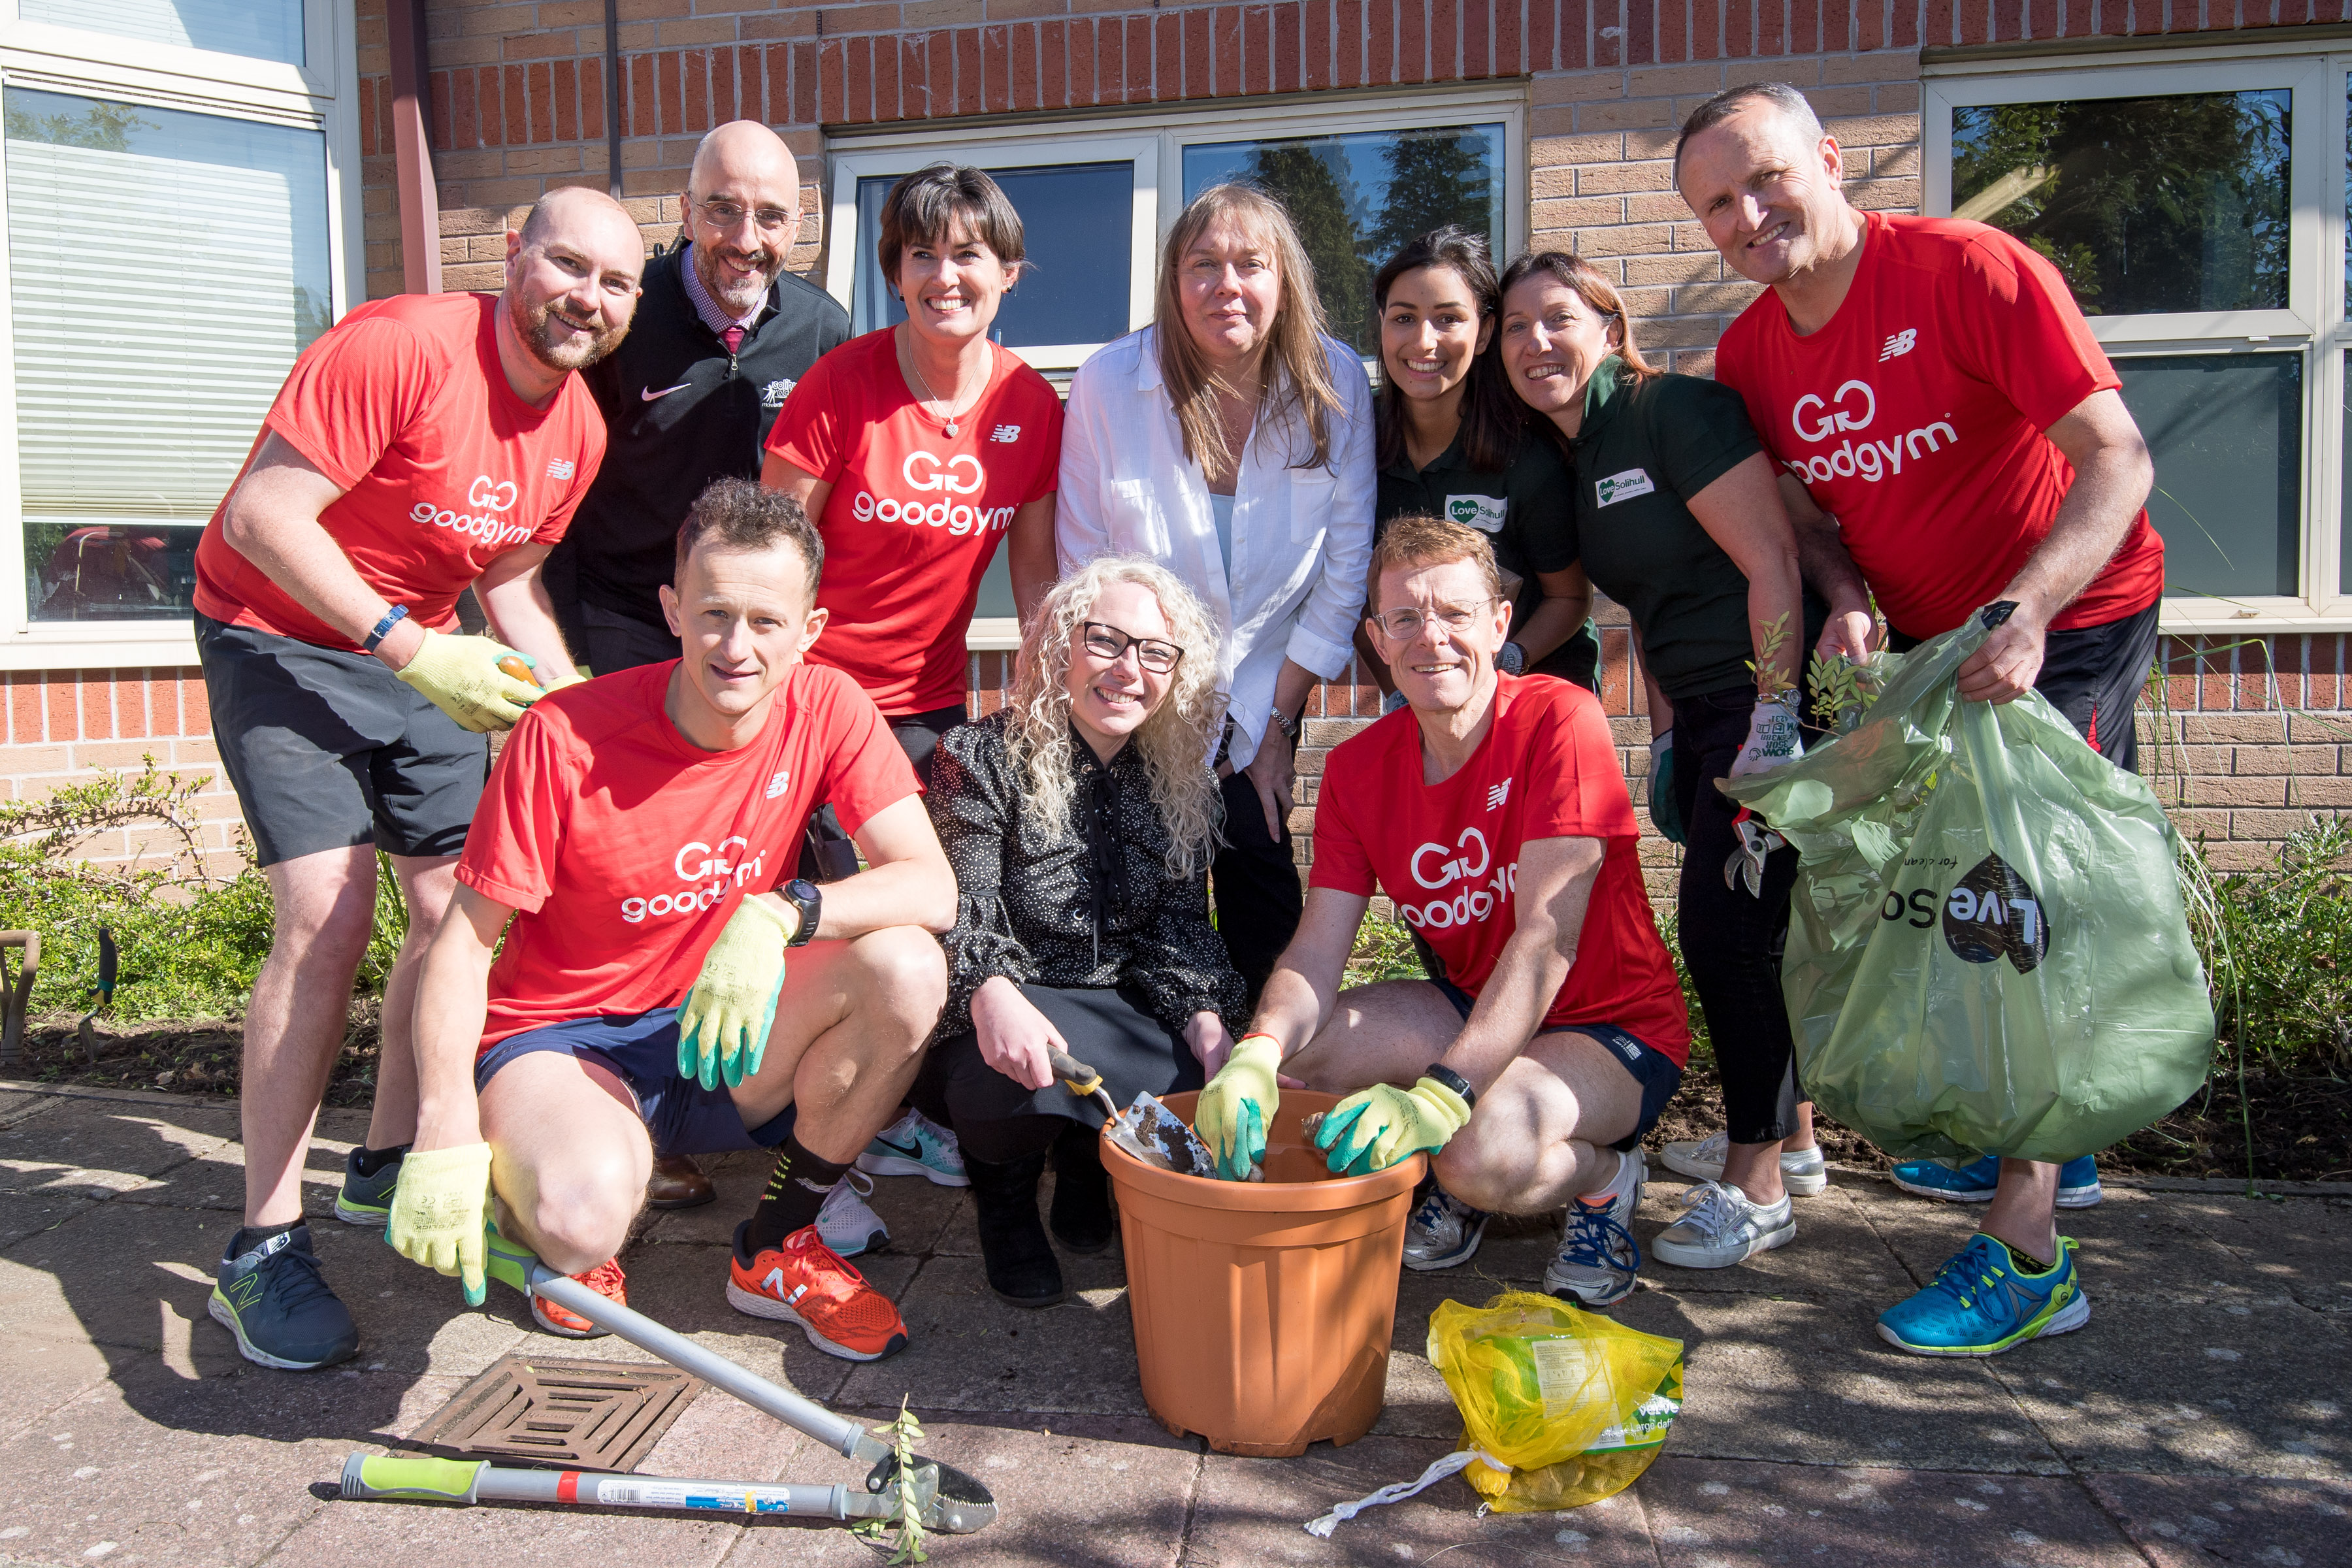 Front l-r: GoodGym founder Ivo Gormley, Solihull Council’s cabinet member for adult social care Cllr Karen Grinsell and West Midlands Mayor Andy Street, with a team of runners and helpers.